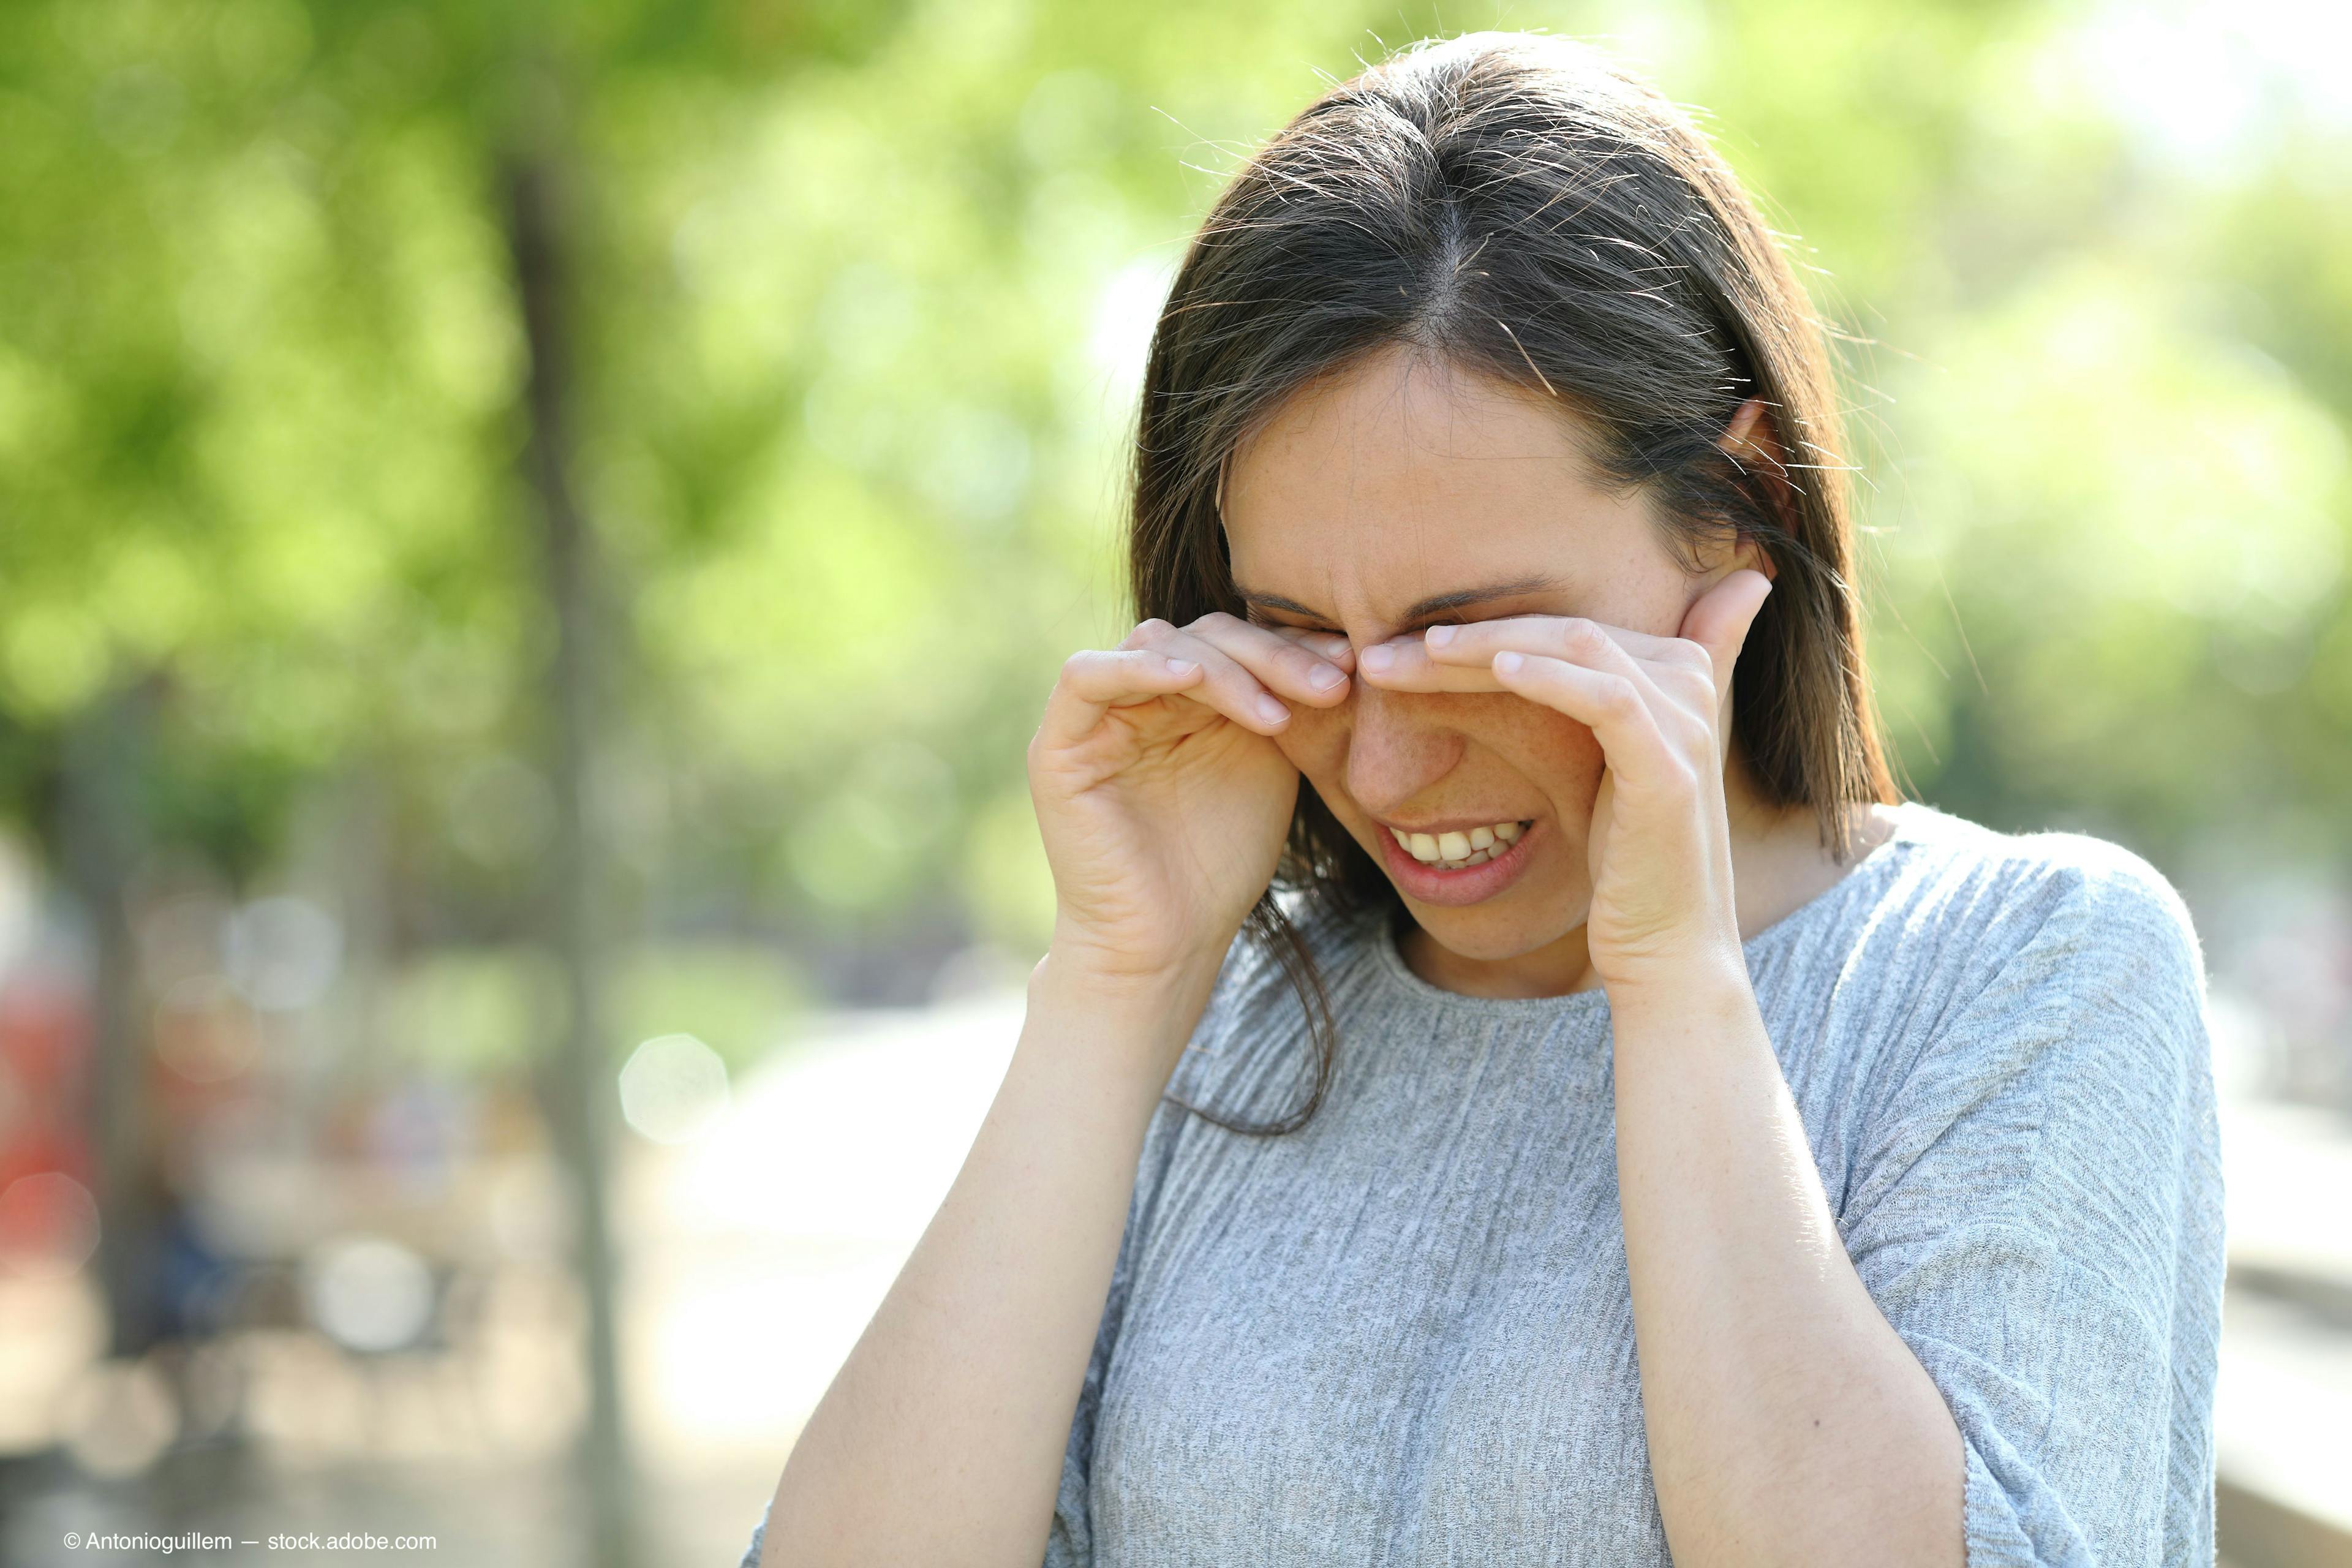 boosting short-term dry eye management in patients